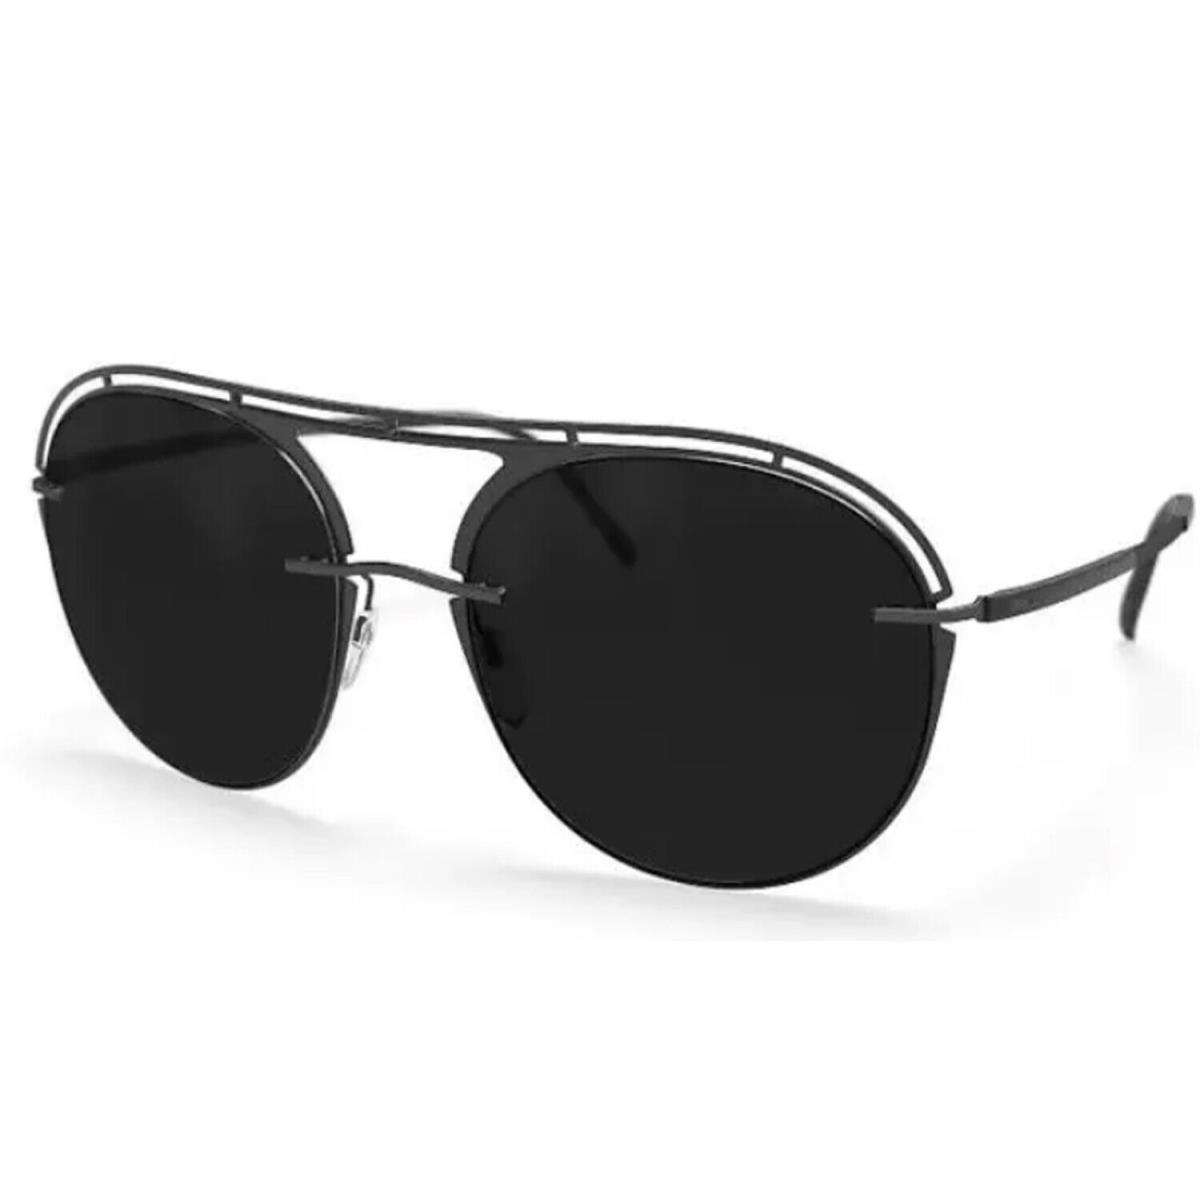 Silhouette Sunglasses Accent Shades 58/19/135 Polarized Grey 8724/75-9040